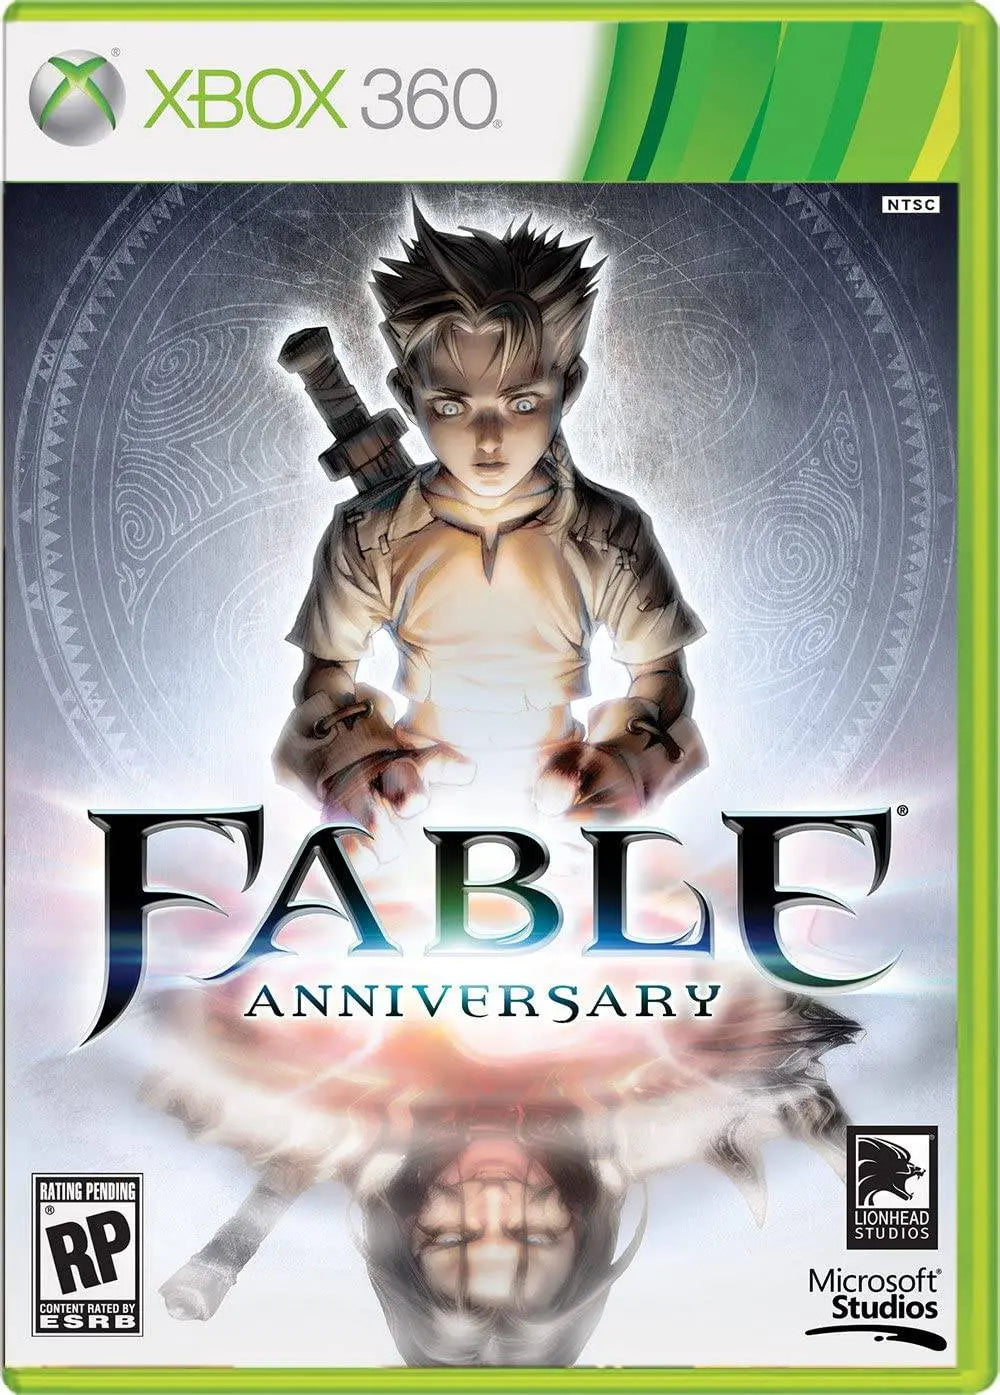 Fable Anniversary for Xbox 360 - USED COPY King Gaming